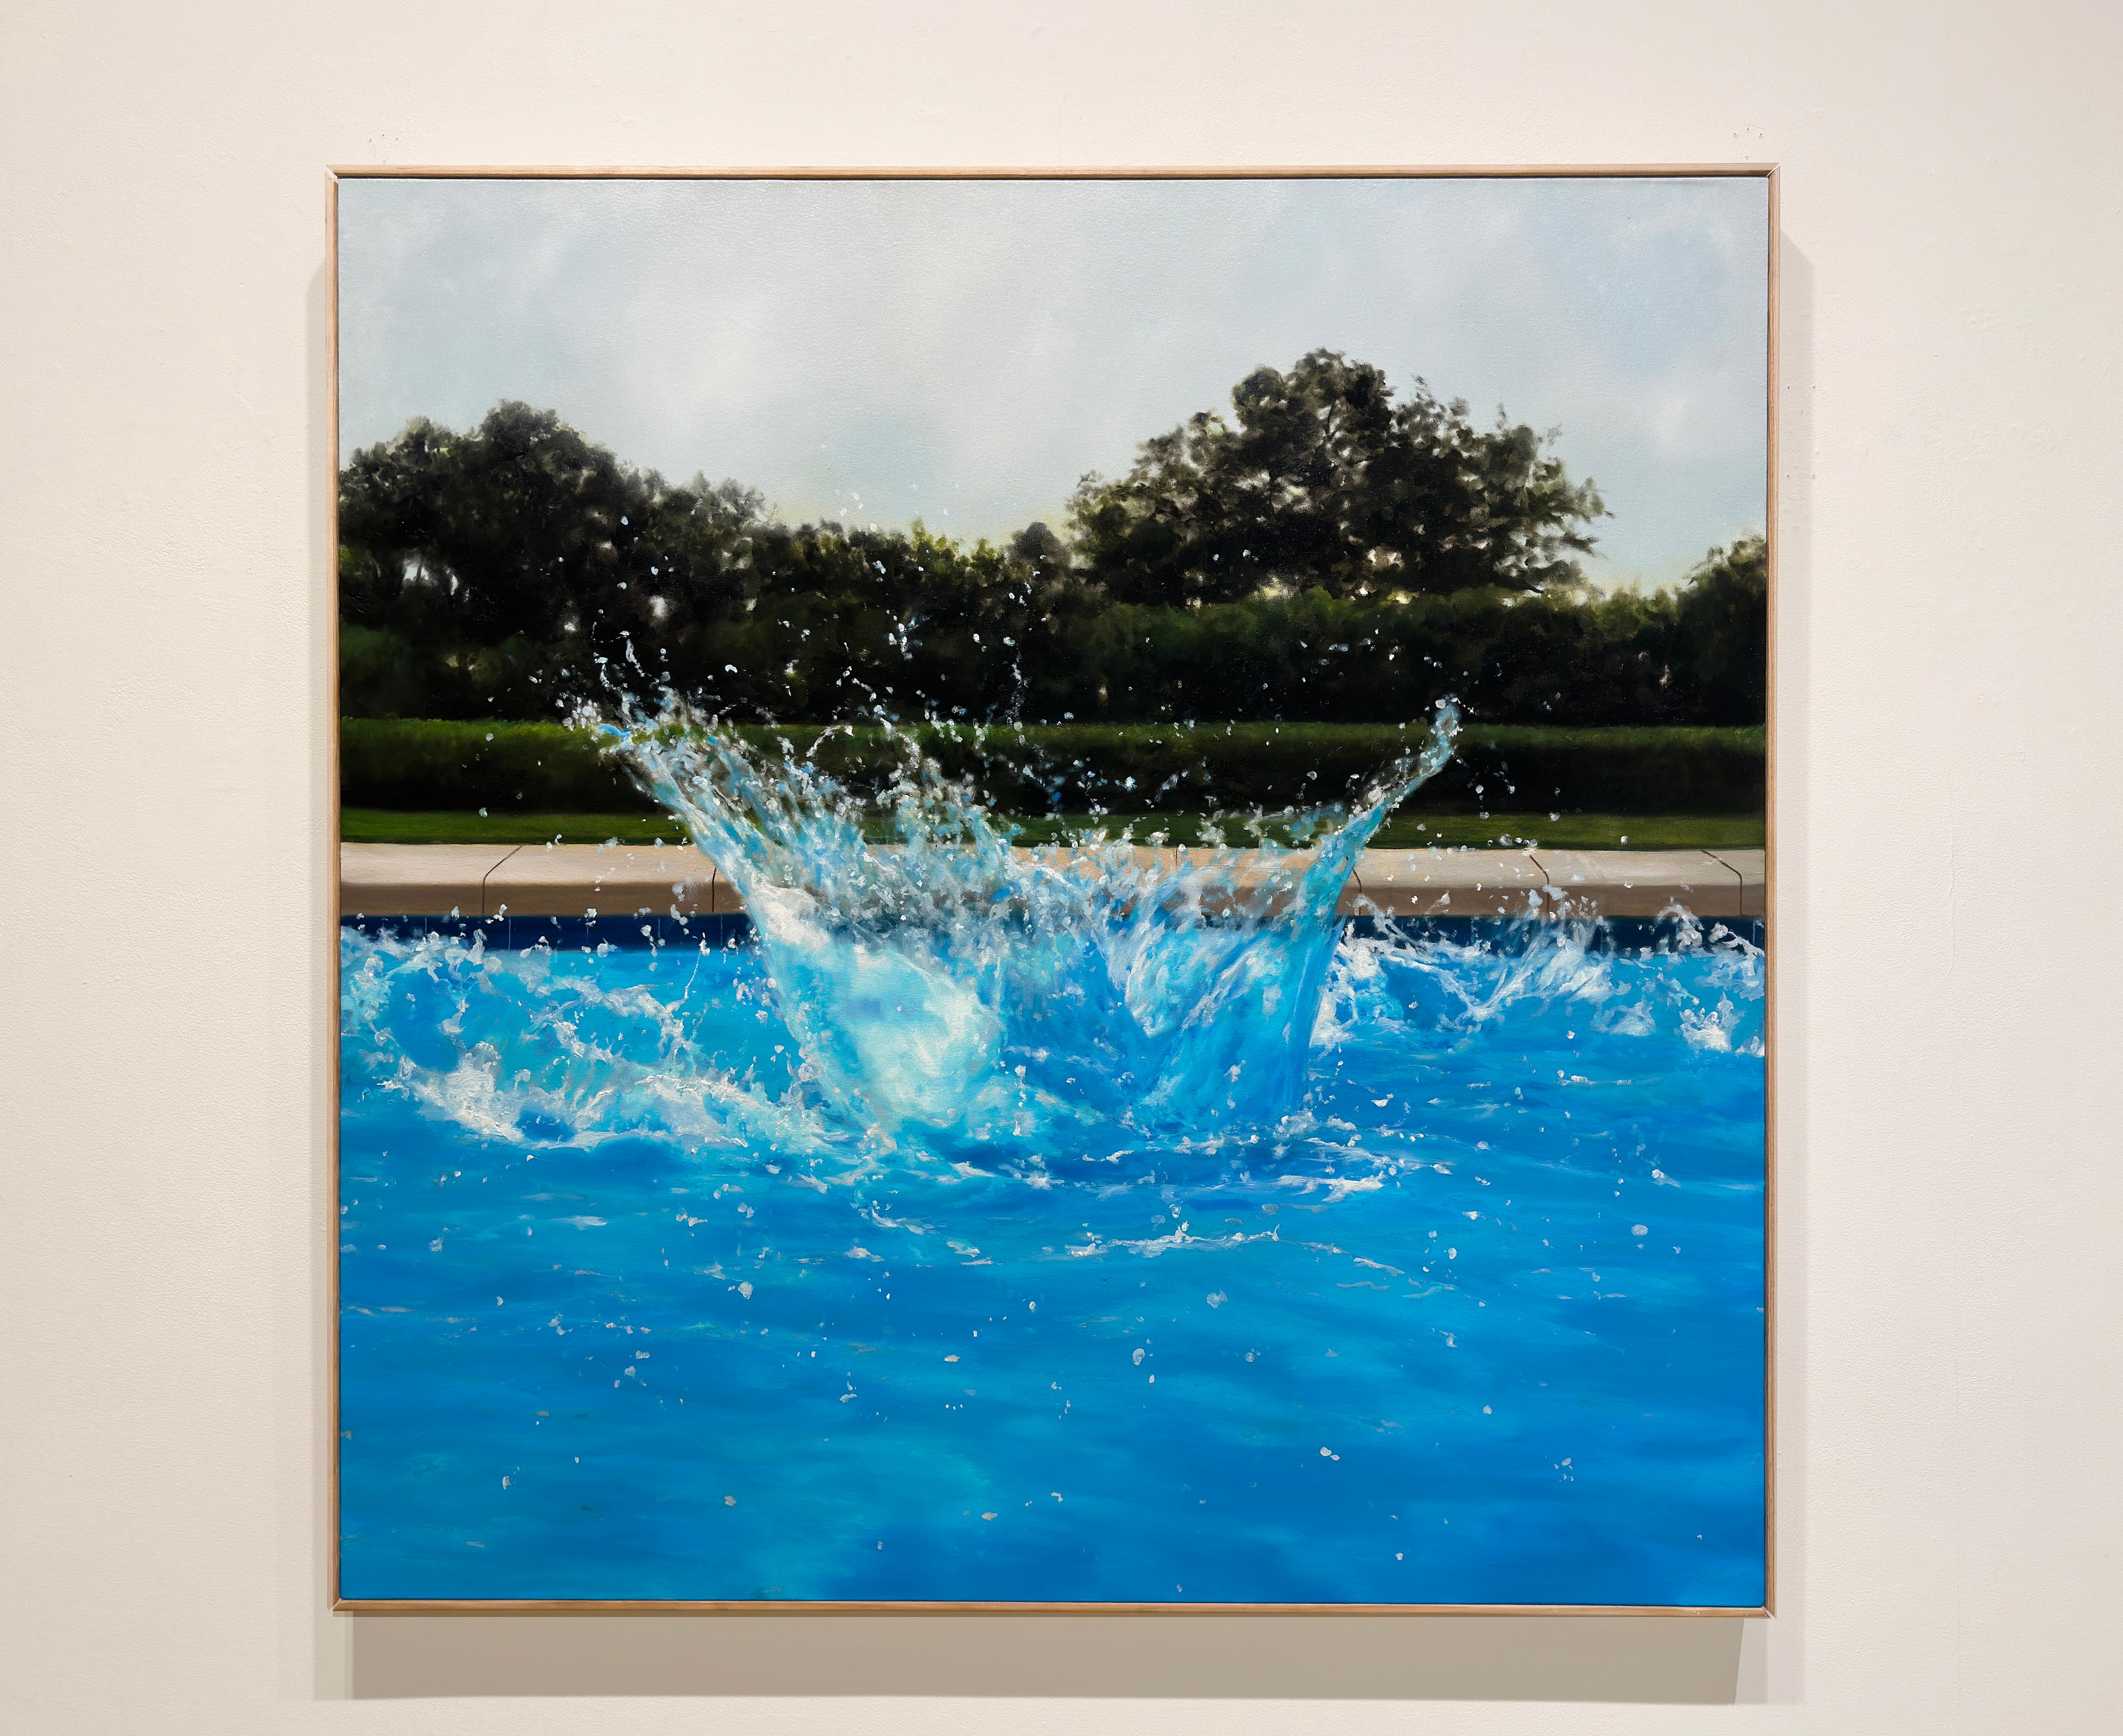 MONTECITO MORNING - Contemporary Realism / Pool Water Scene / California Vibe - Painting by Eric Zener